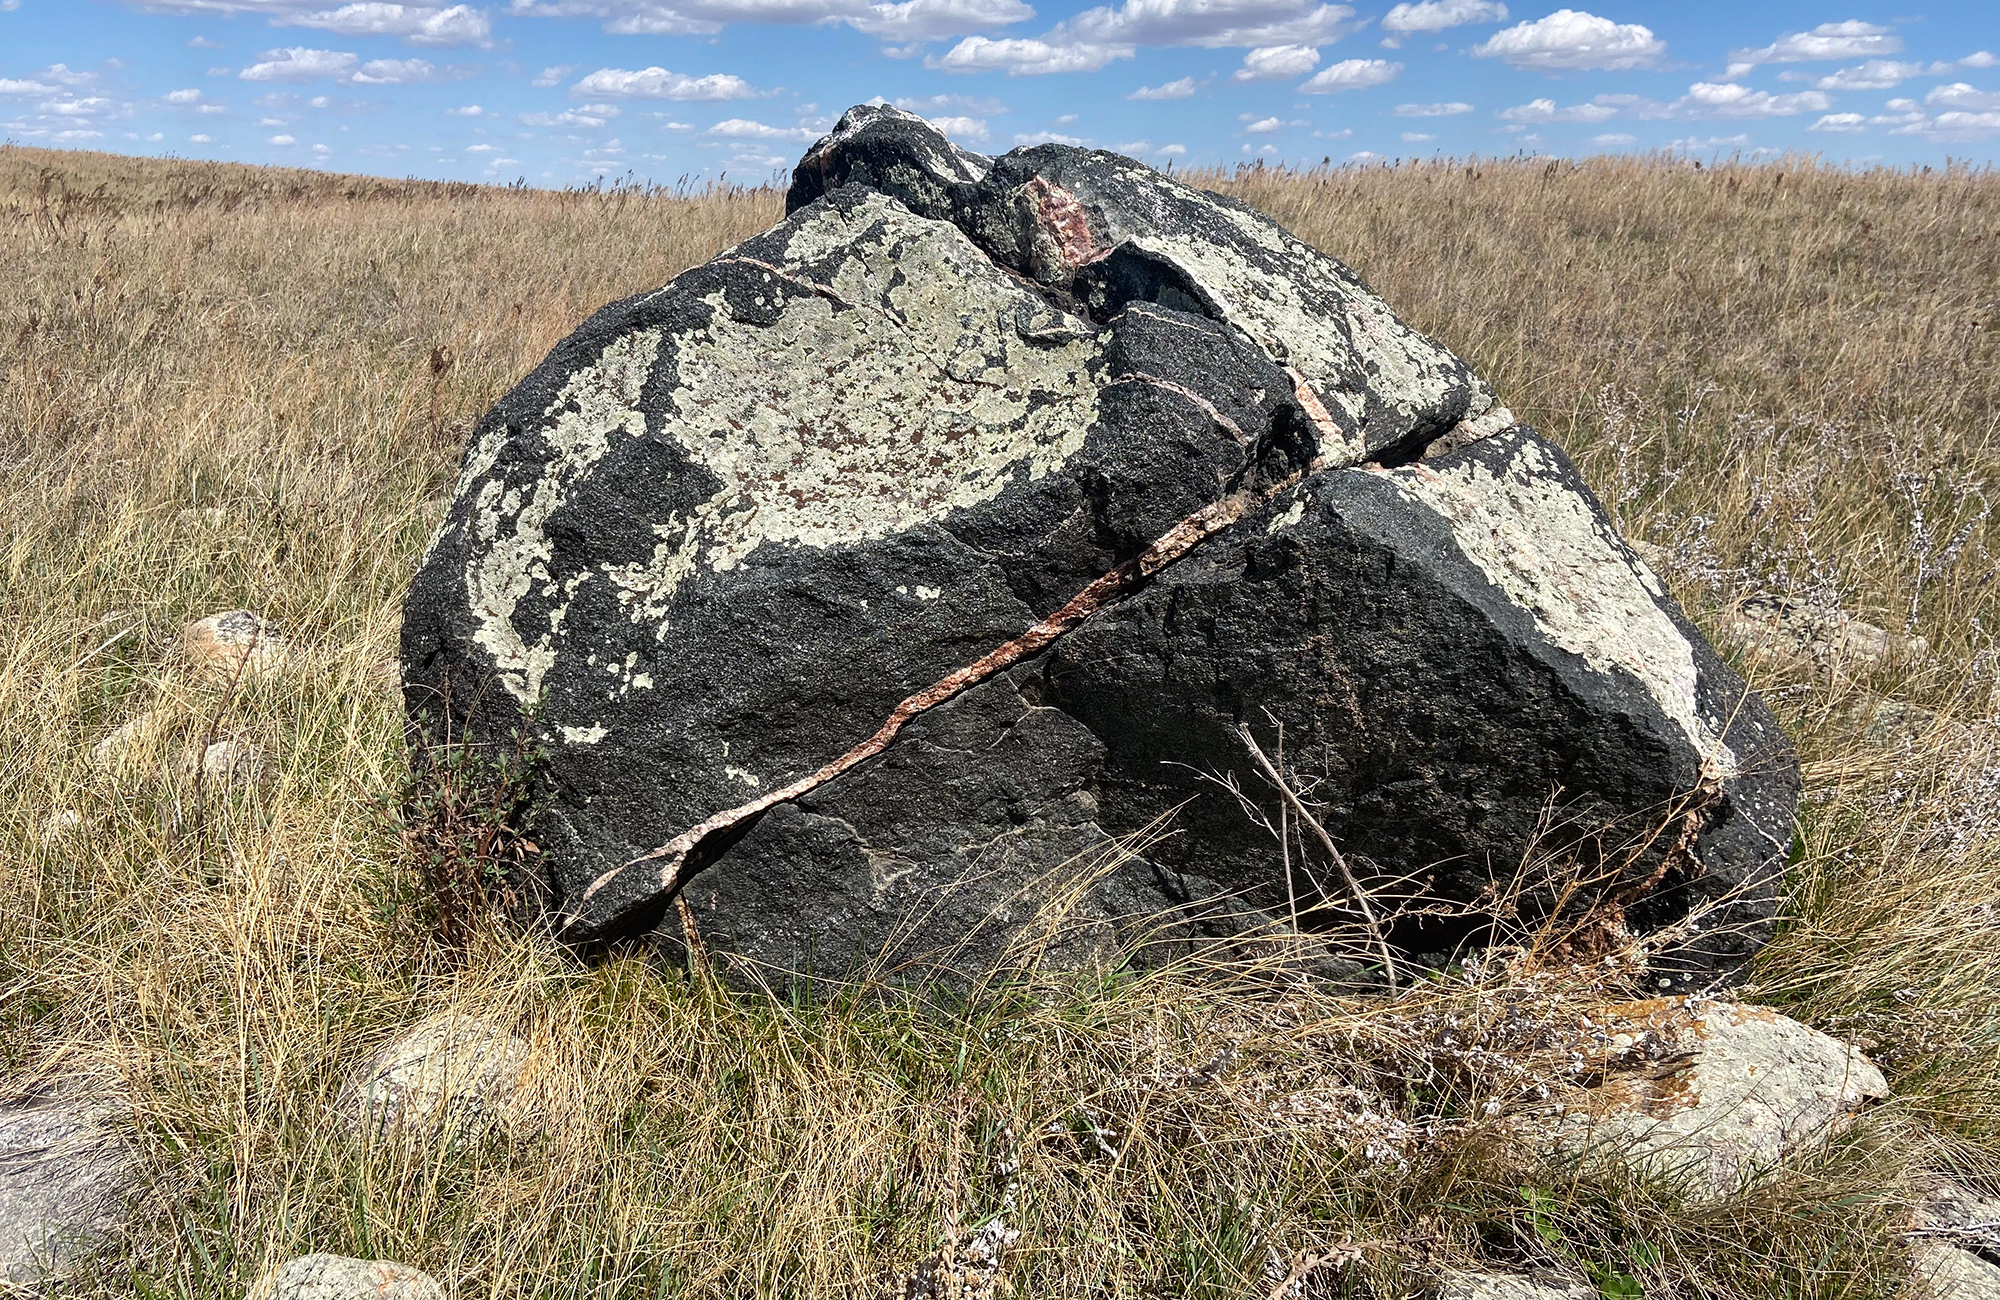 A large, black rock with a pink line through it laying in a field.